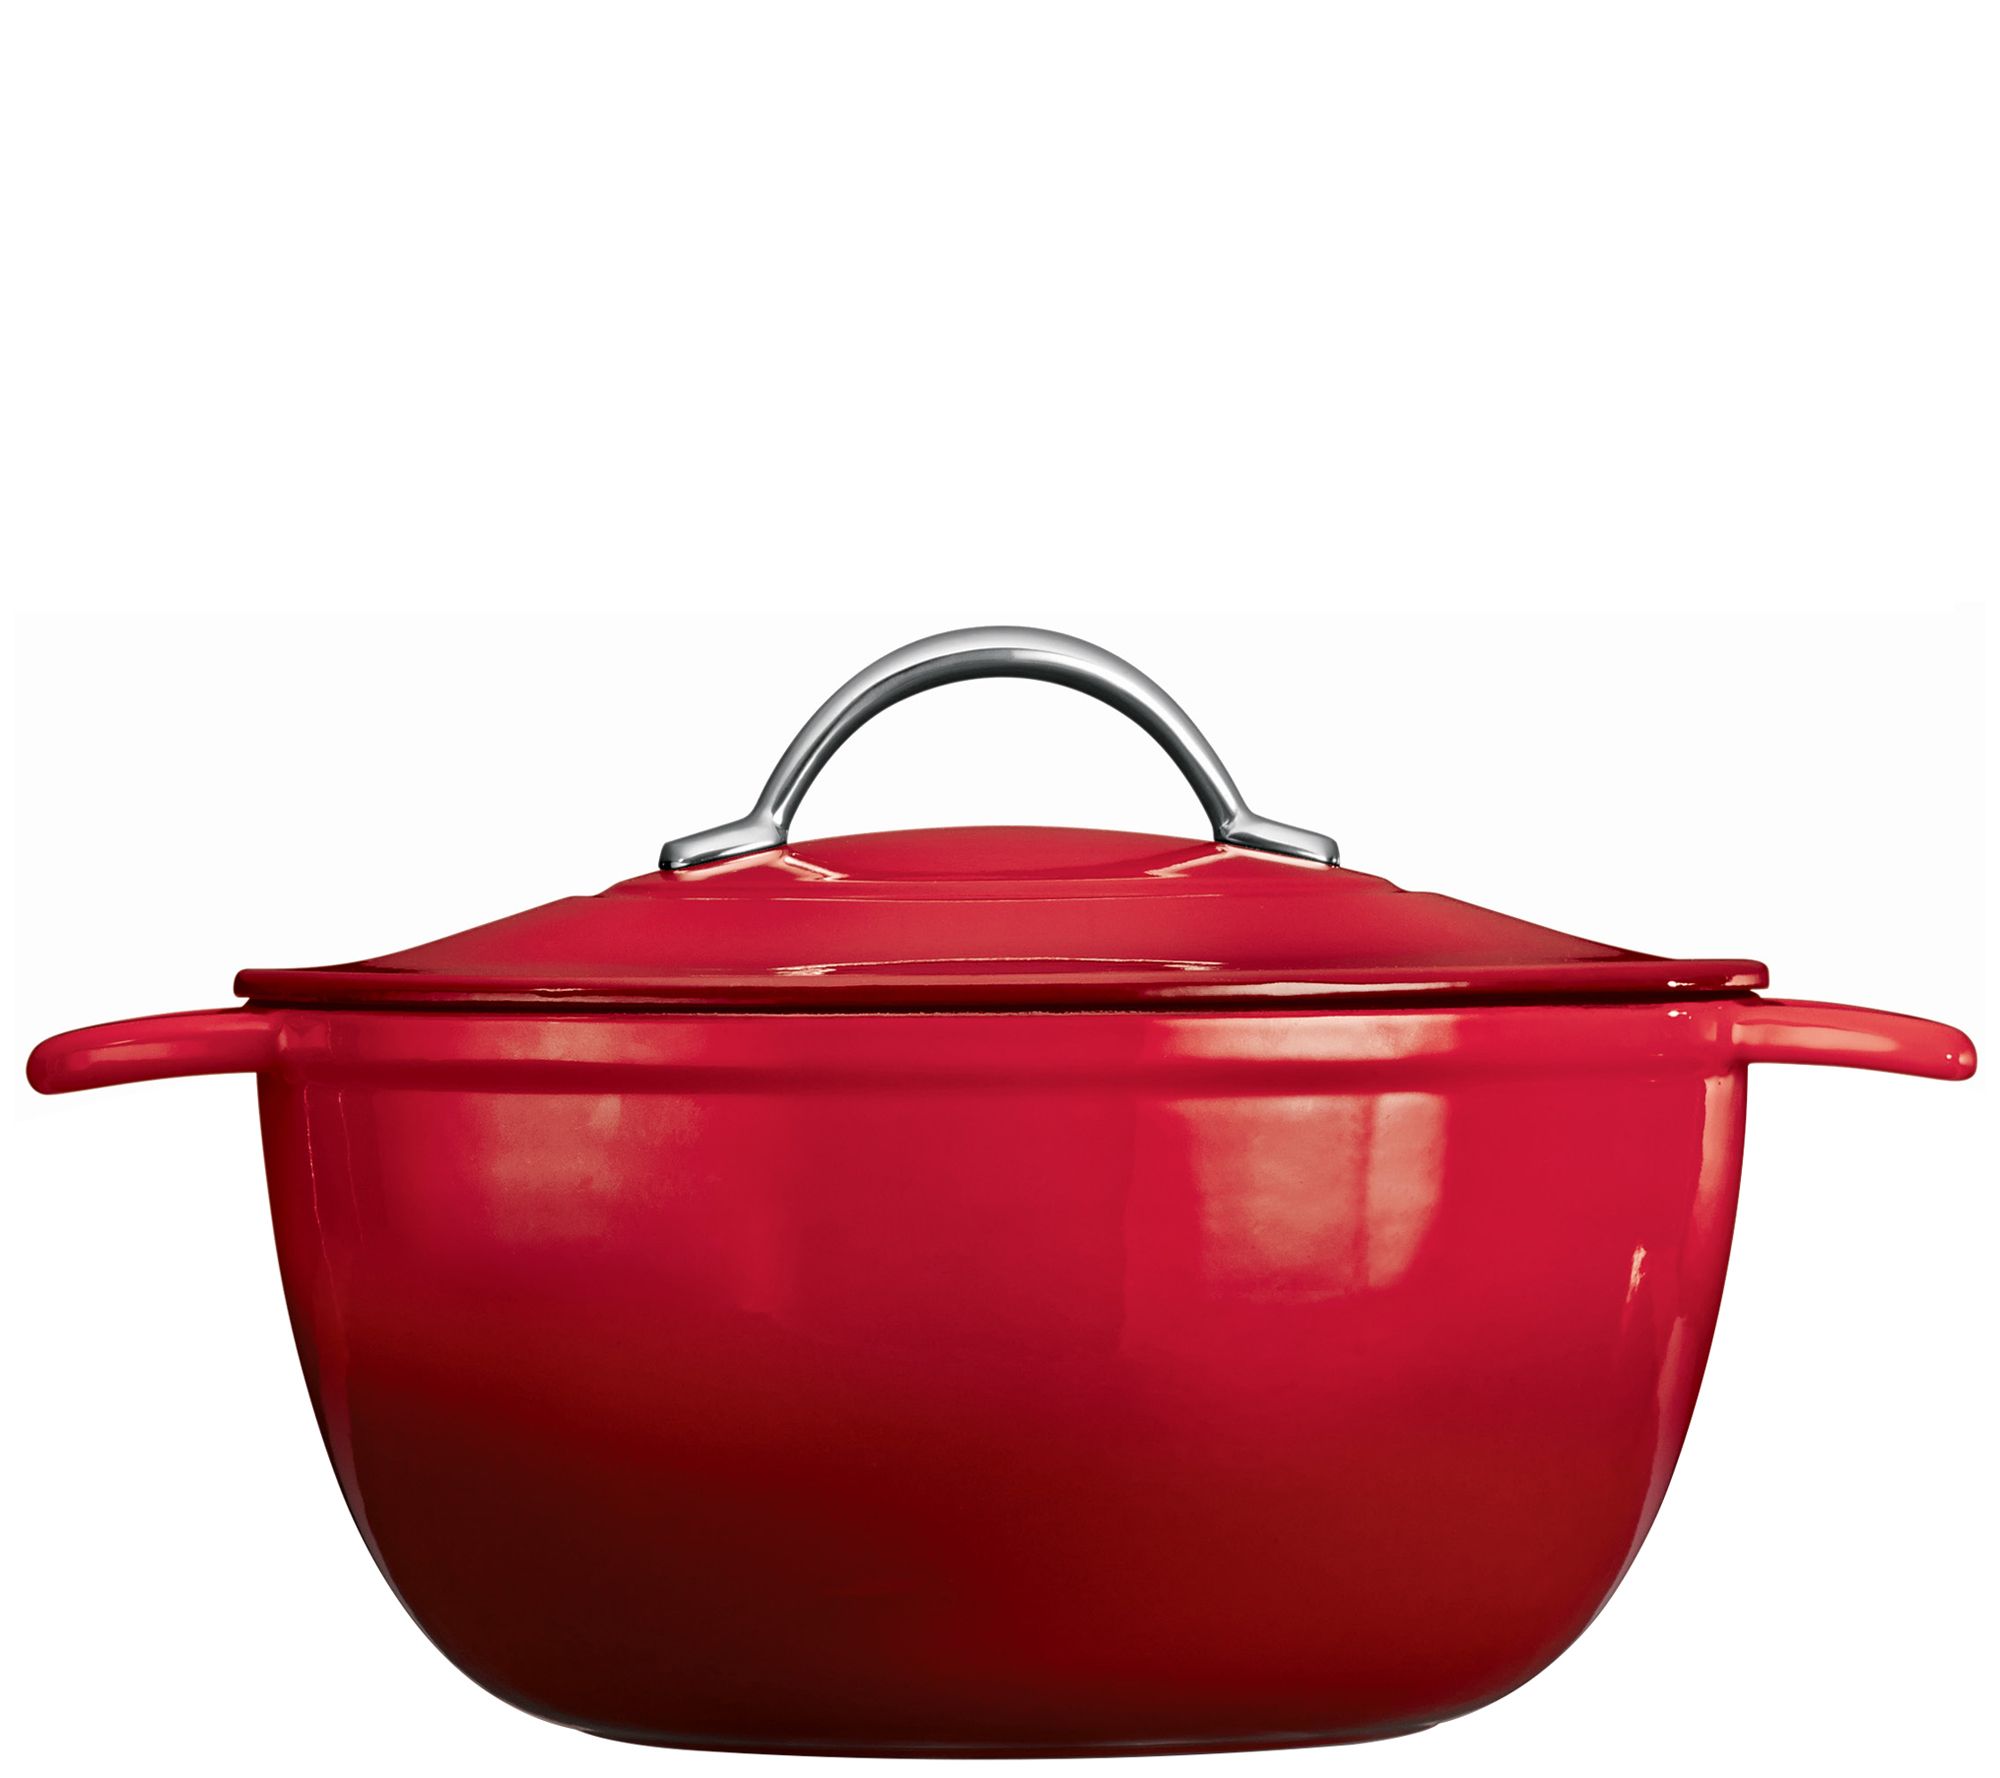 Tramontina Gourmet 7 qt. Oval Enameled Cast Iron Dutch Oven in